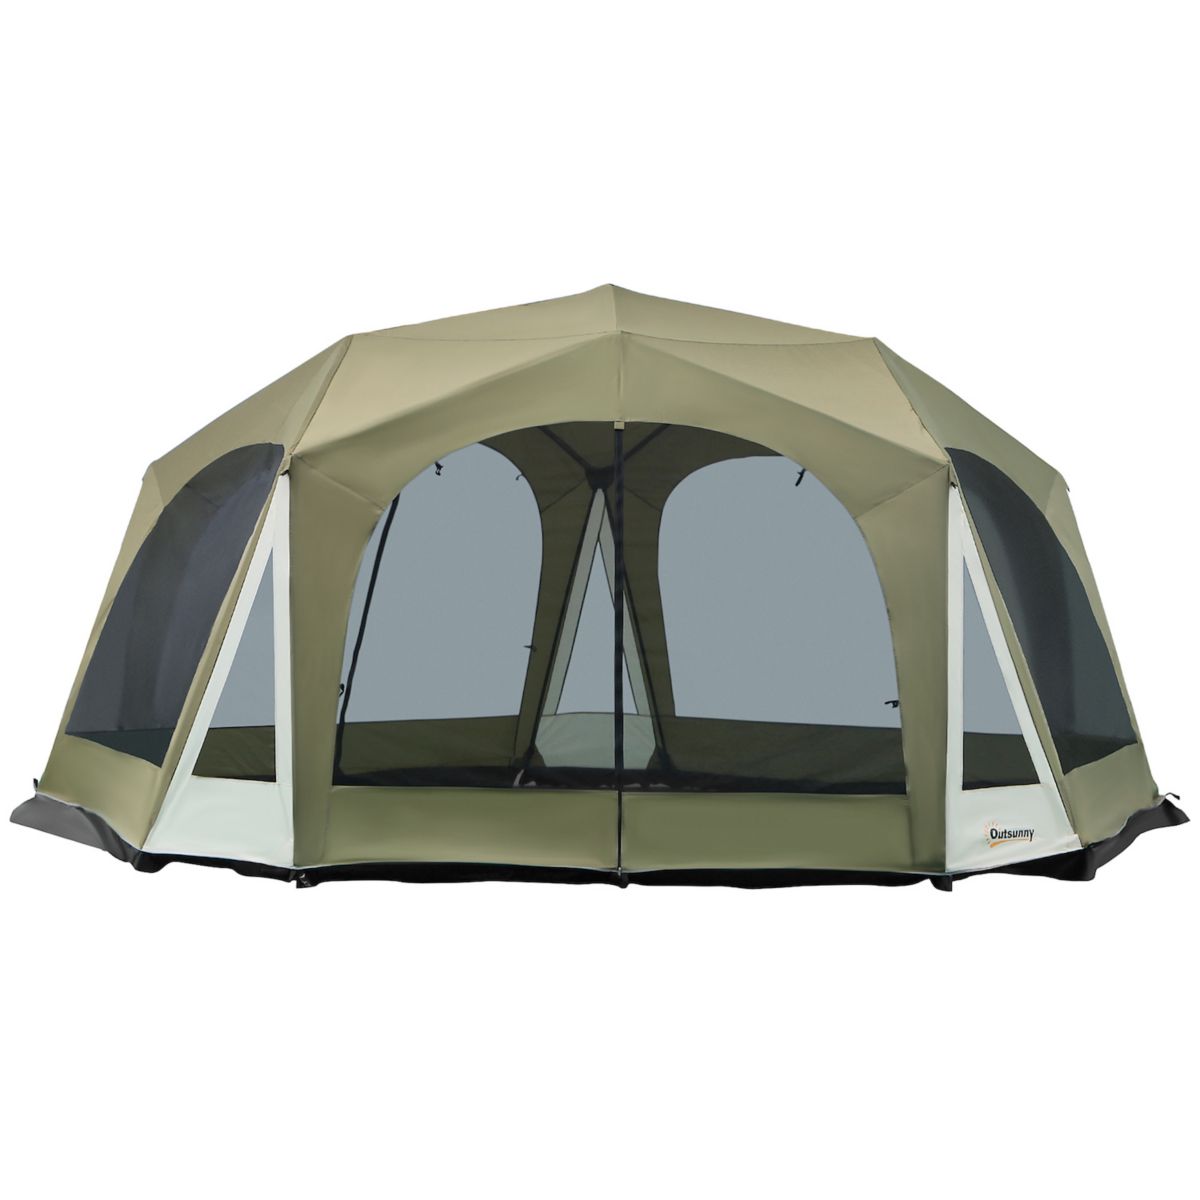 Outsunny 20 Person Camping Tent, Outdoor Tent with 2 Doors, Screen Room, Family Dome Tent for Hiking, Backpacking, Traveling, Easy Set Up, Army Green Outsunny